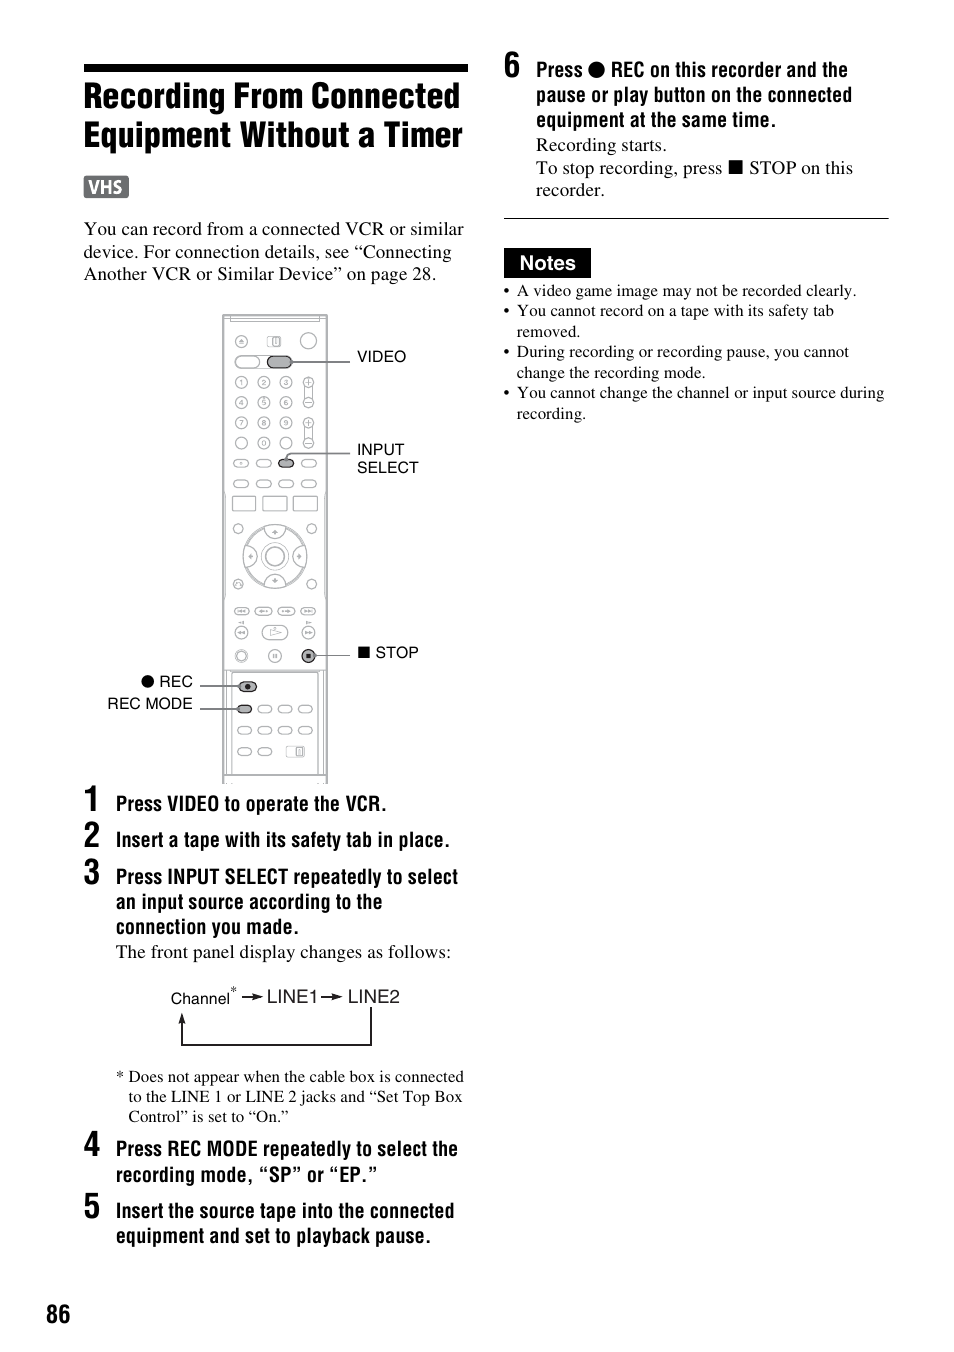 Recording from connected equipment without a timer | Sony RDR-VX521 User Manual | Page 86 / 132